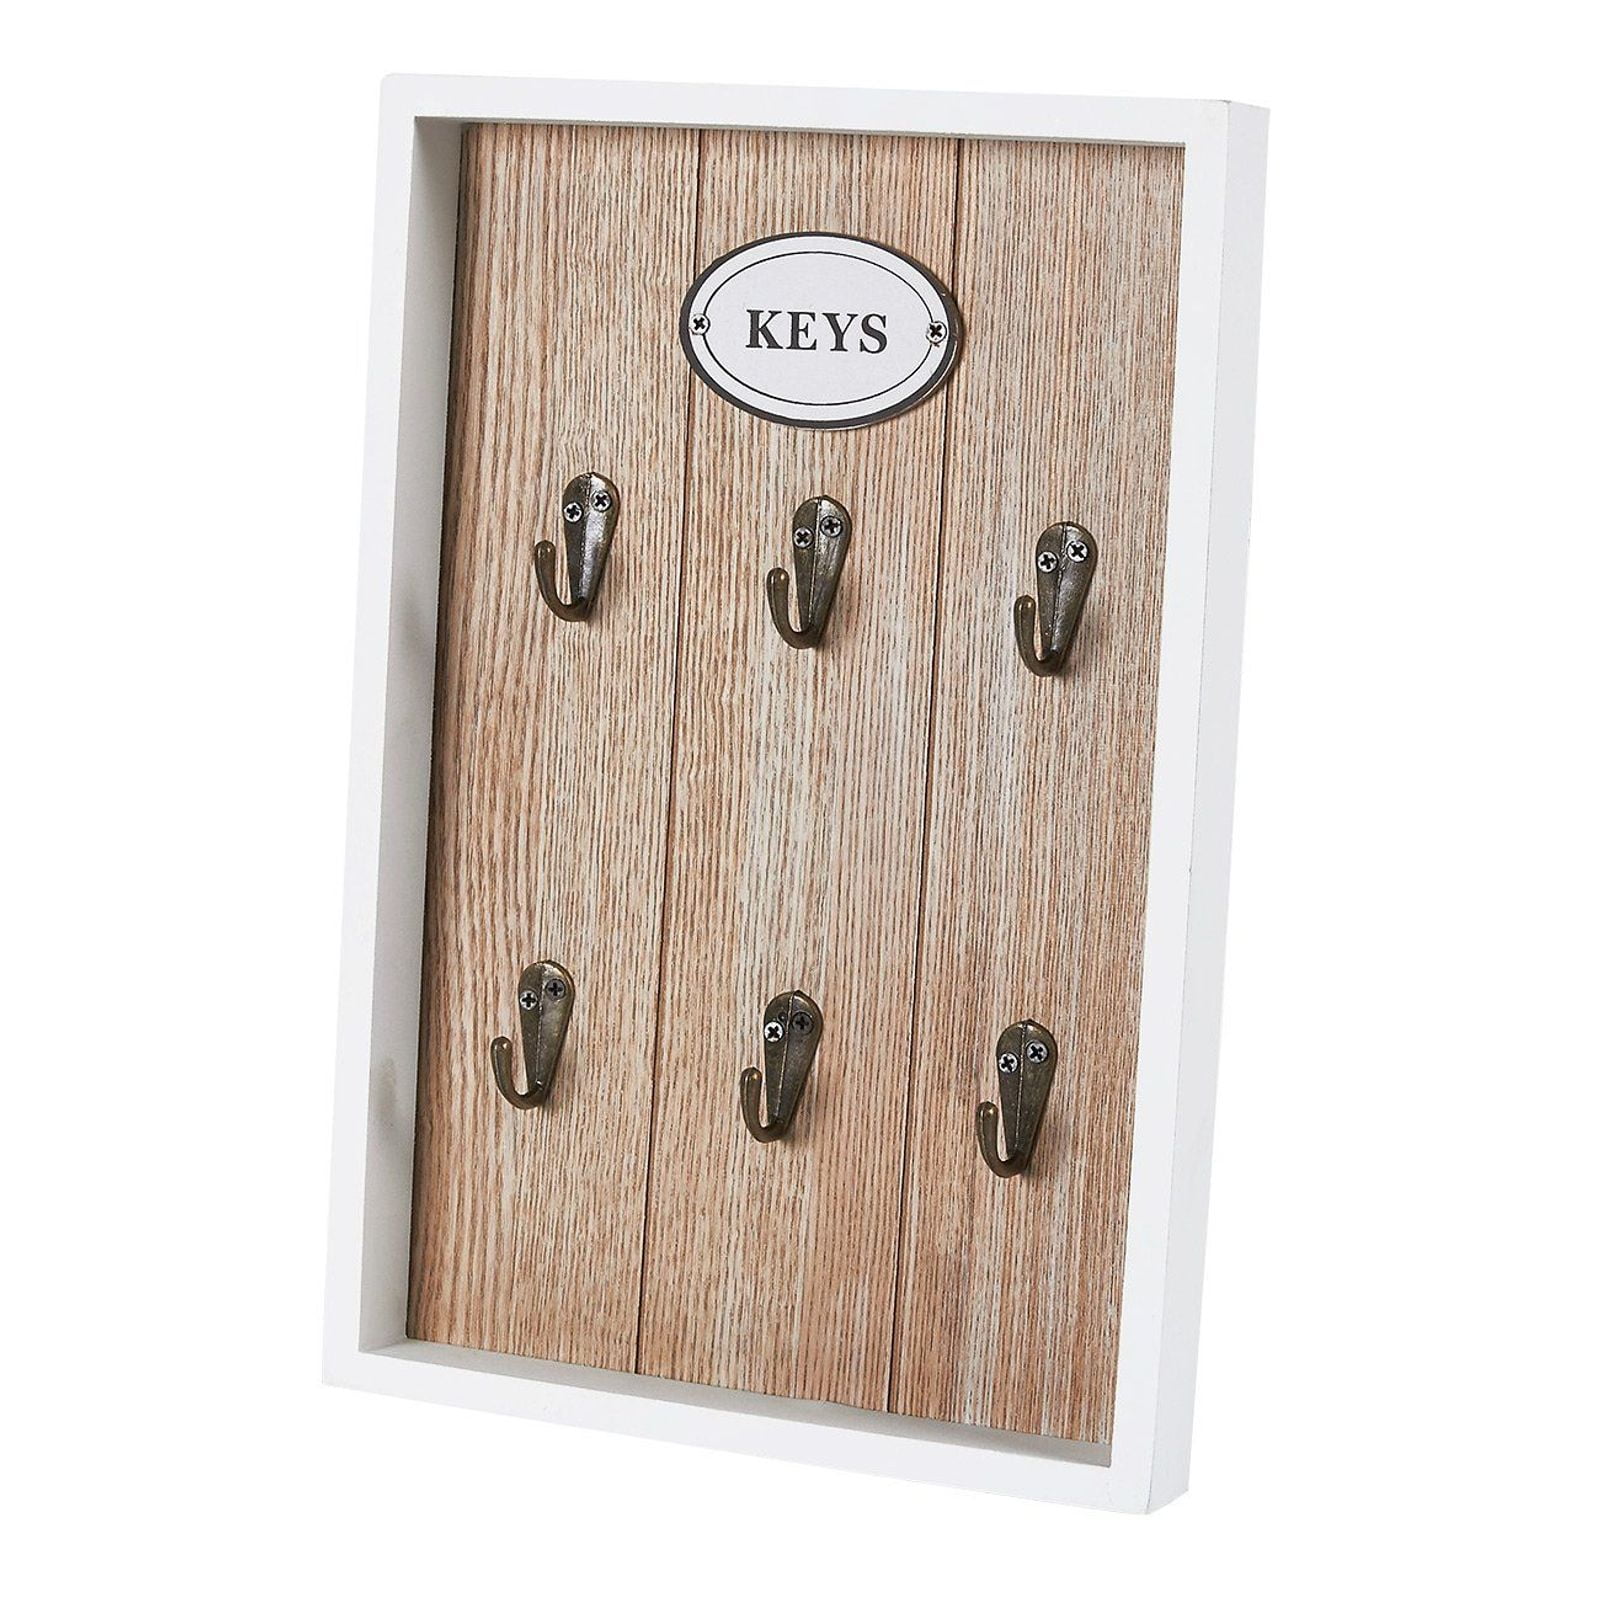 Solid Wood 11.75" x 4.5" Personalized Wall Mounted Key Rack 